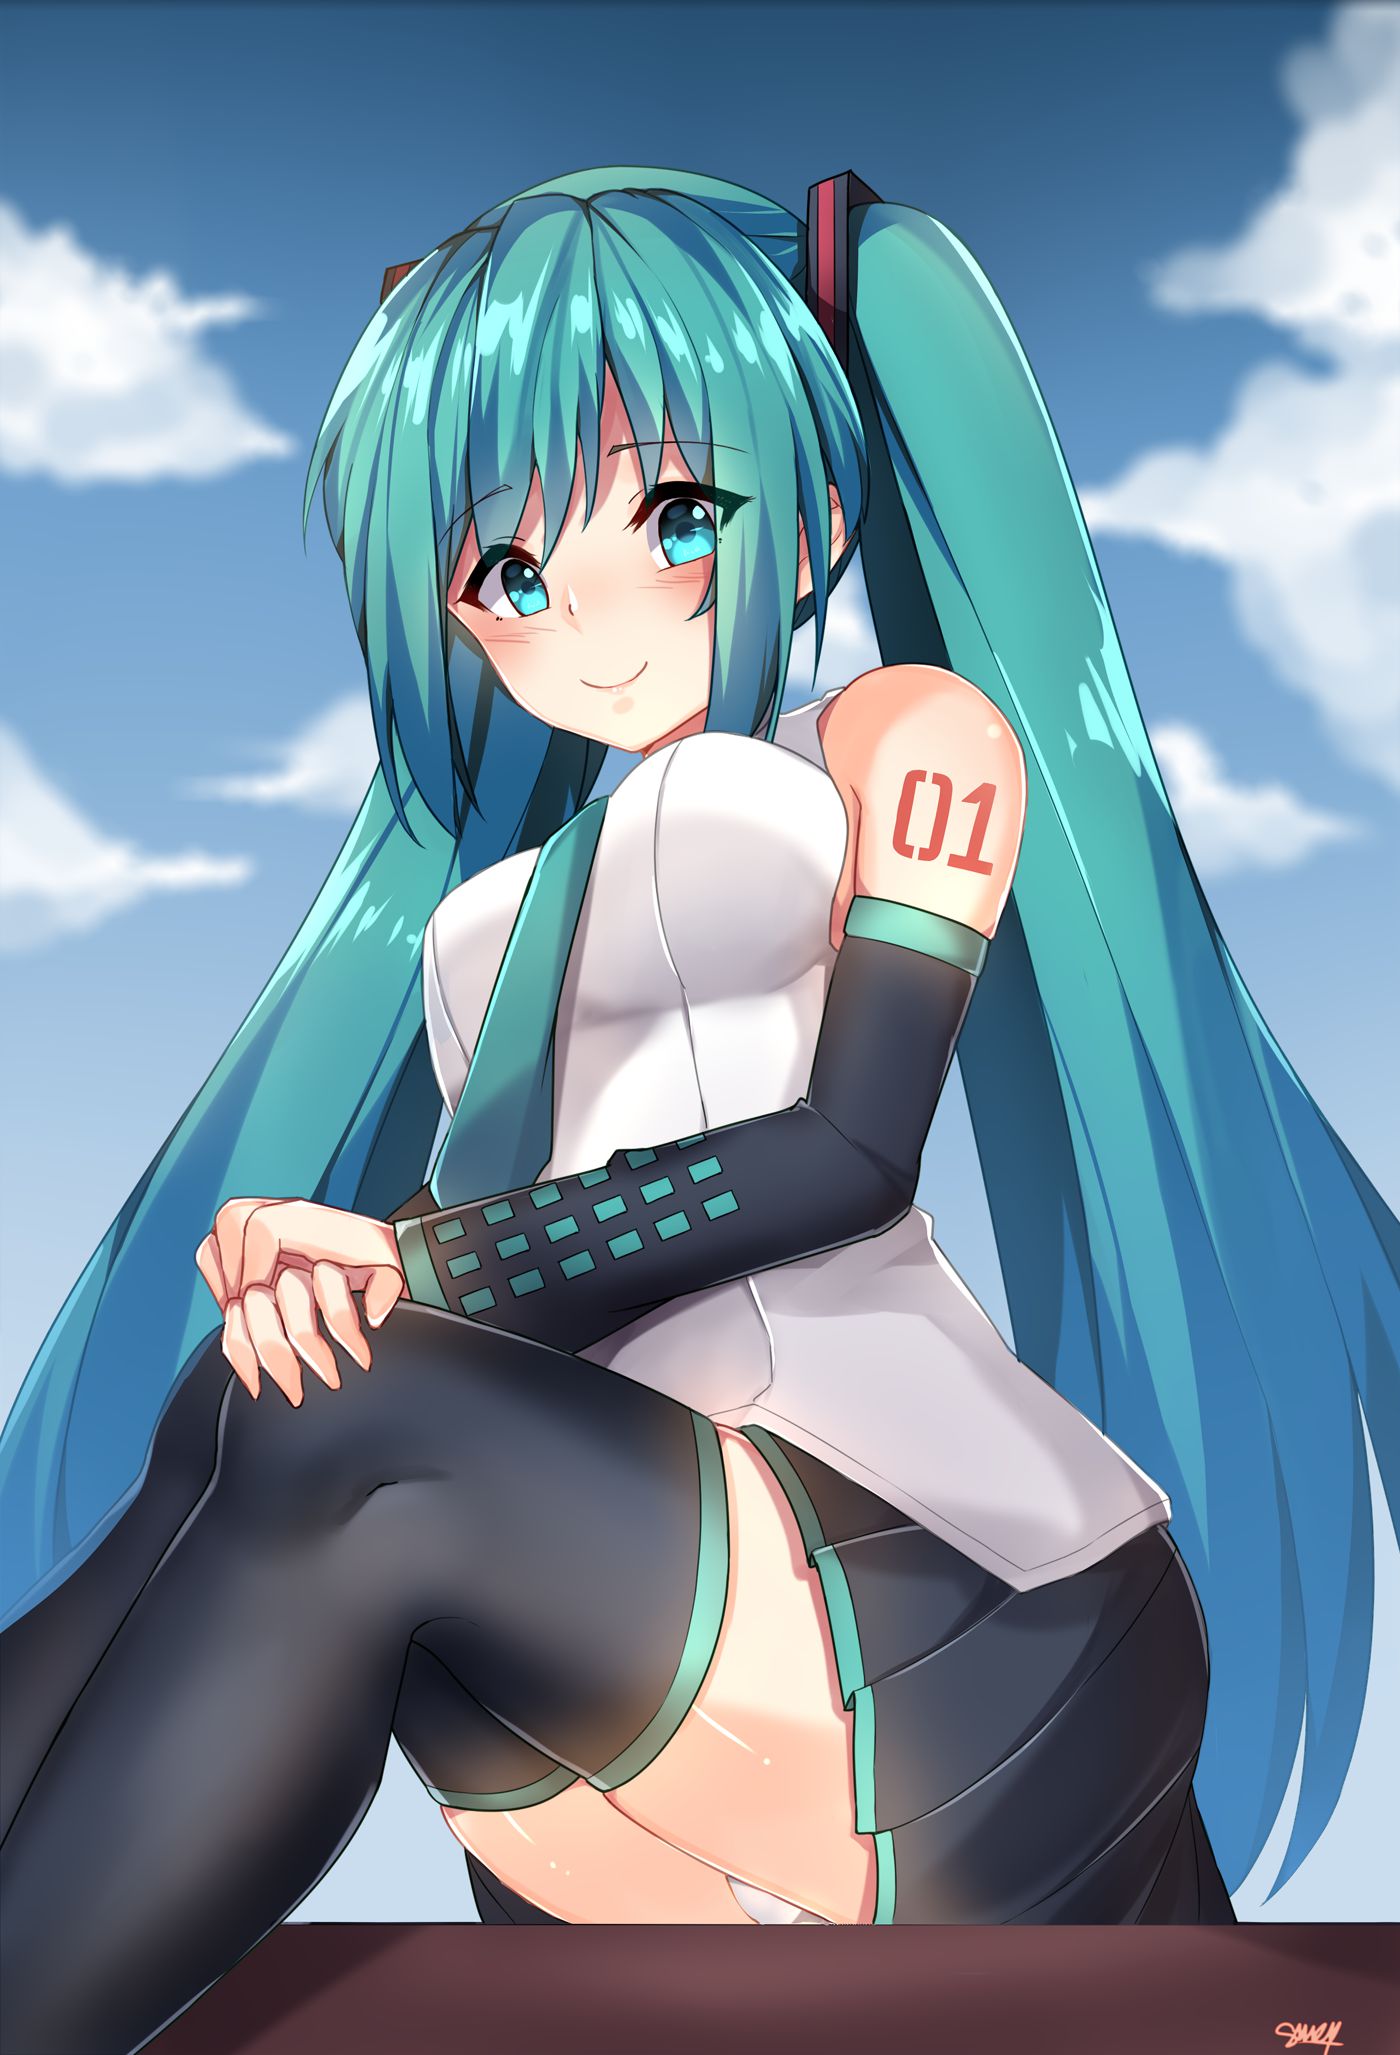 Miku's other, vocaloid's image summary. Vol. 3 39